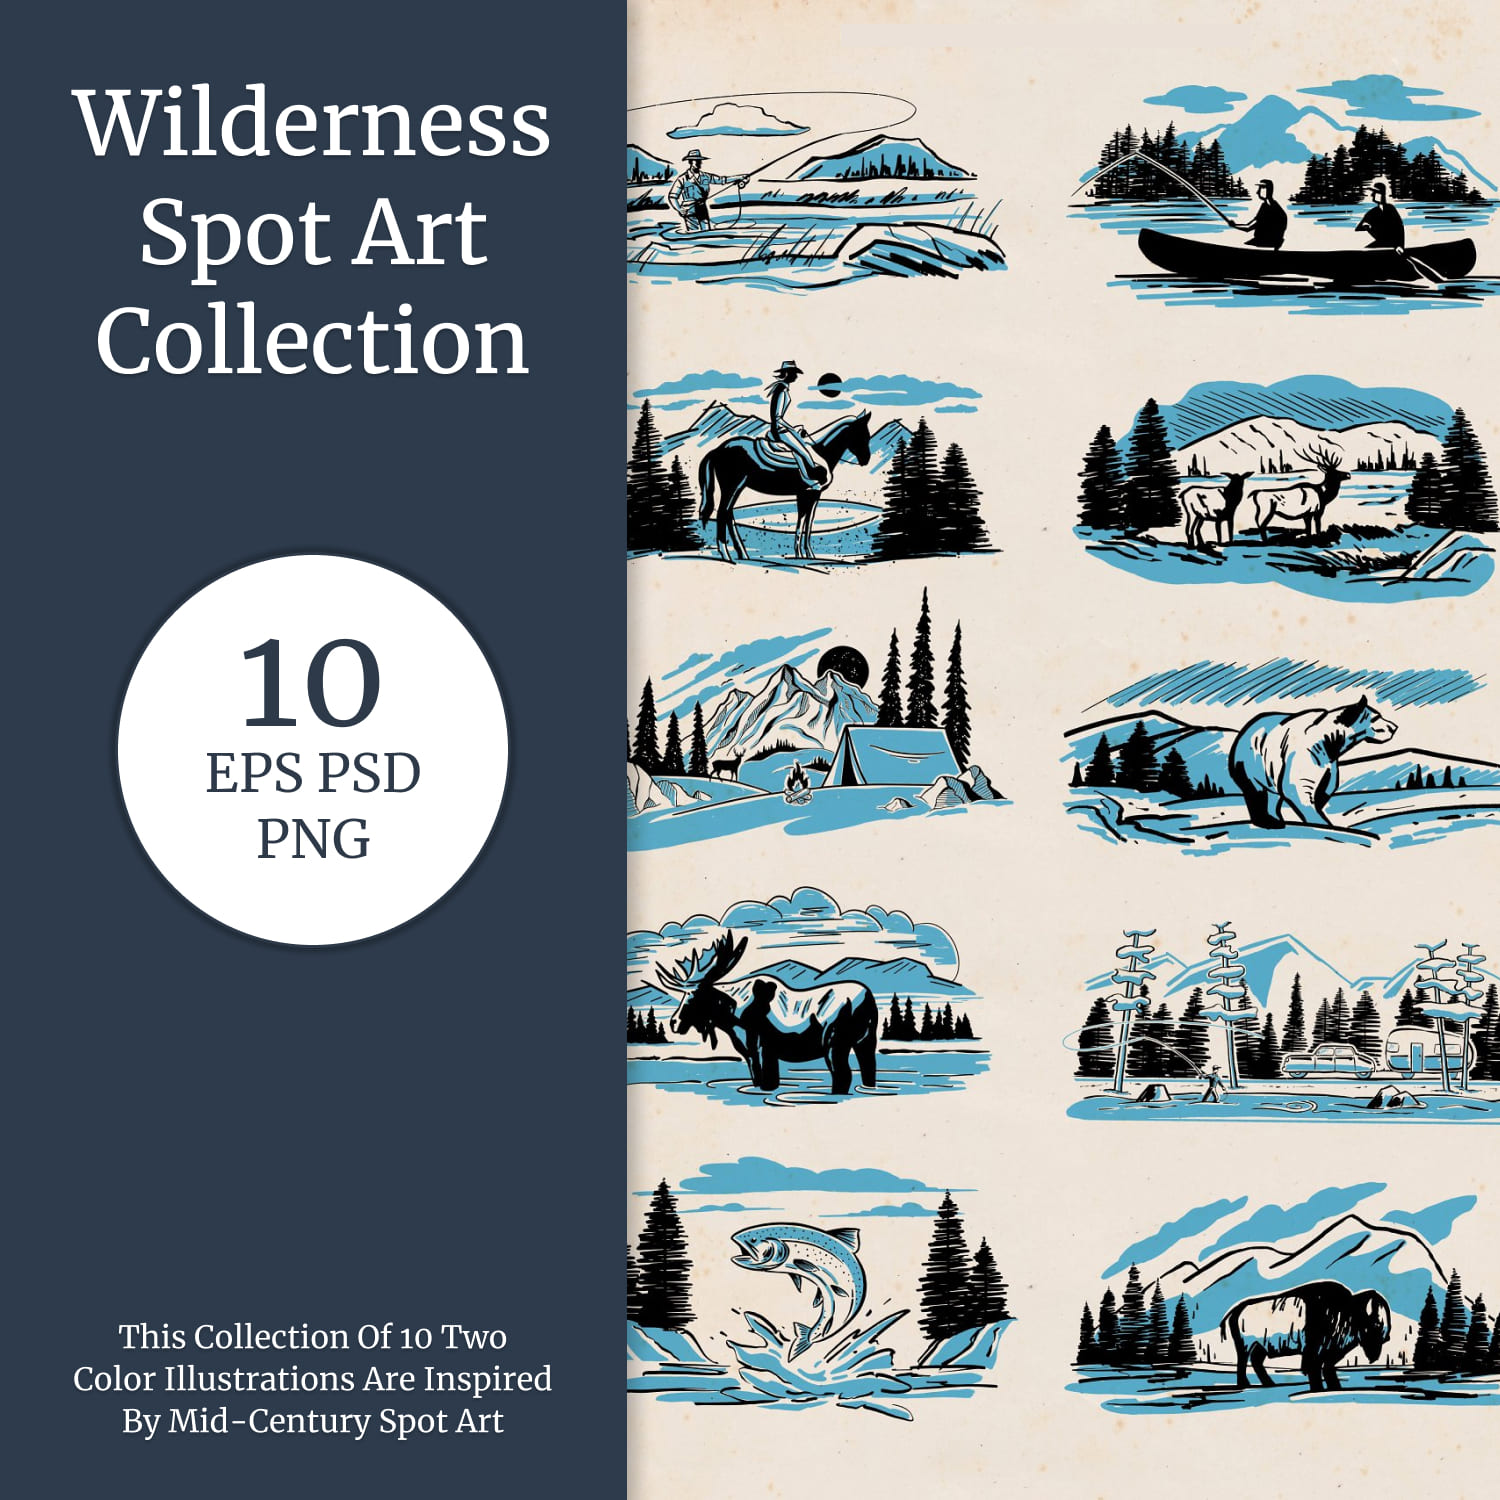 Wilderness Spot Art Collection - main image preview.